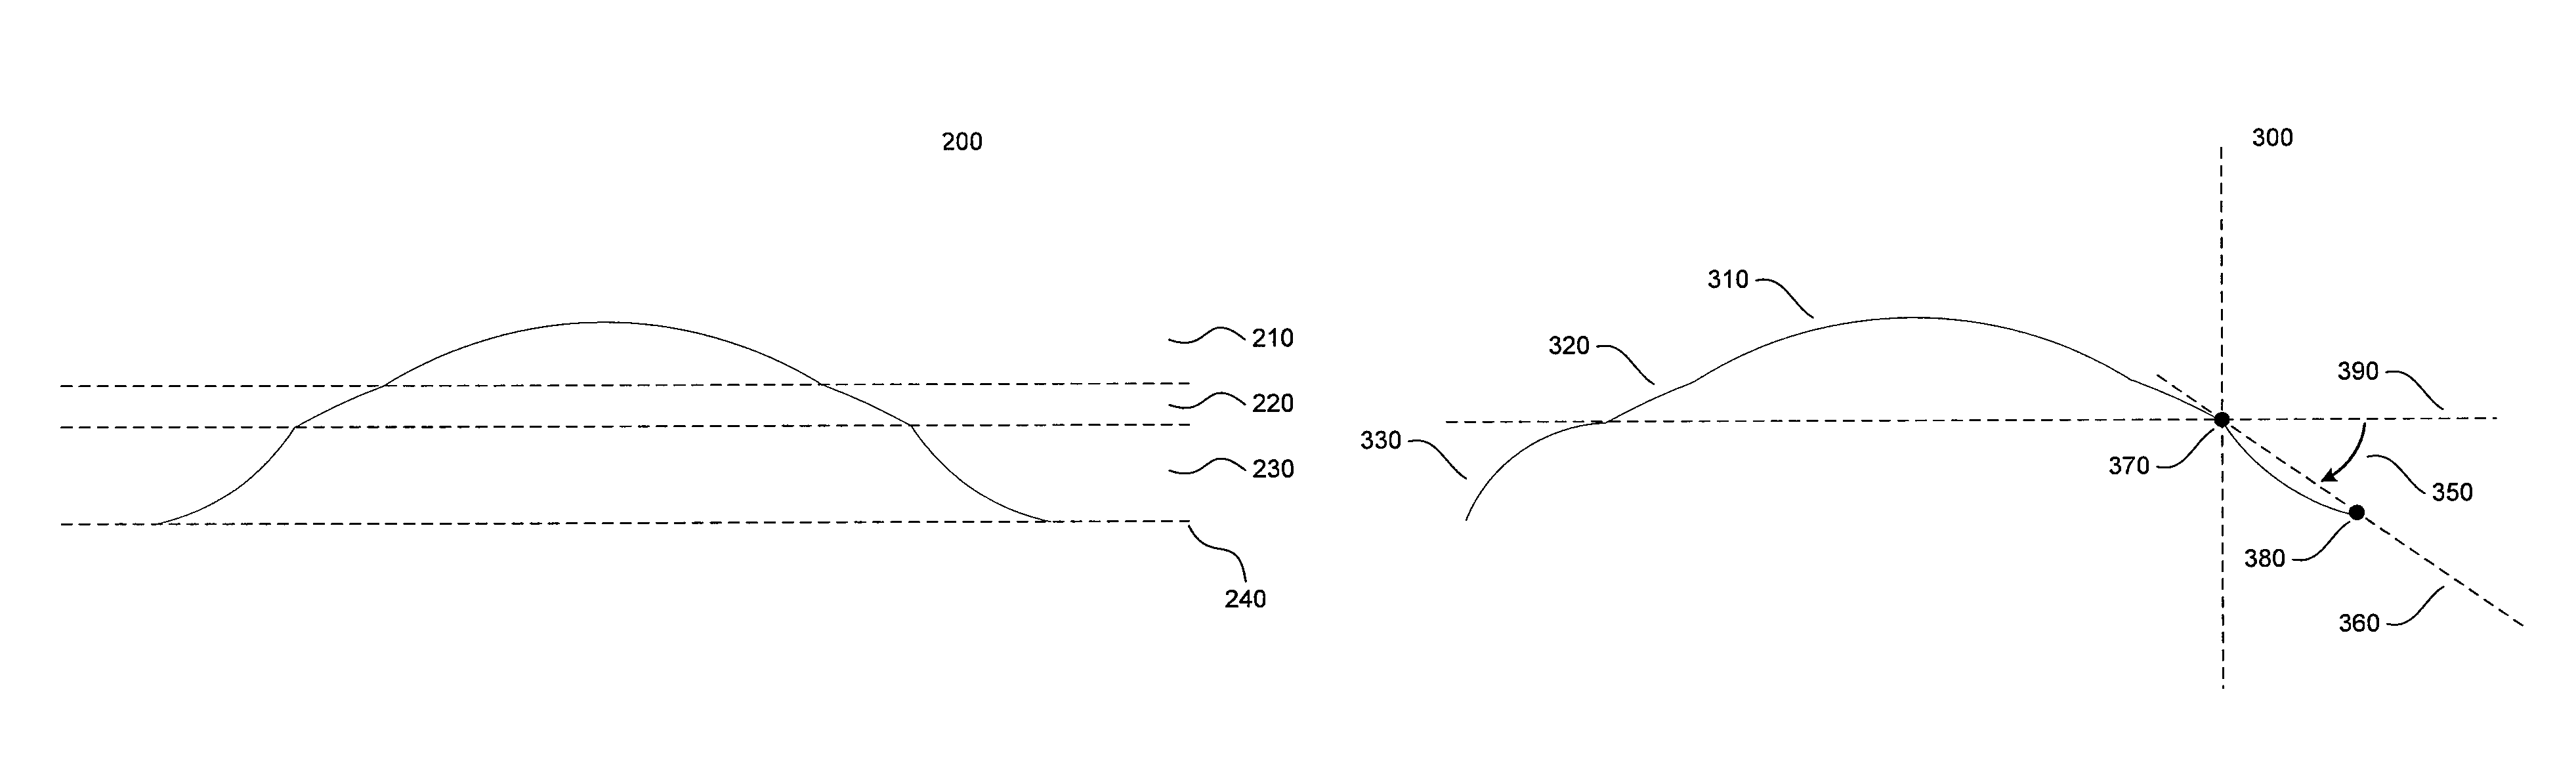 Scleral contact lens and methods for making and using the same